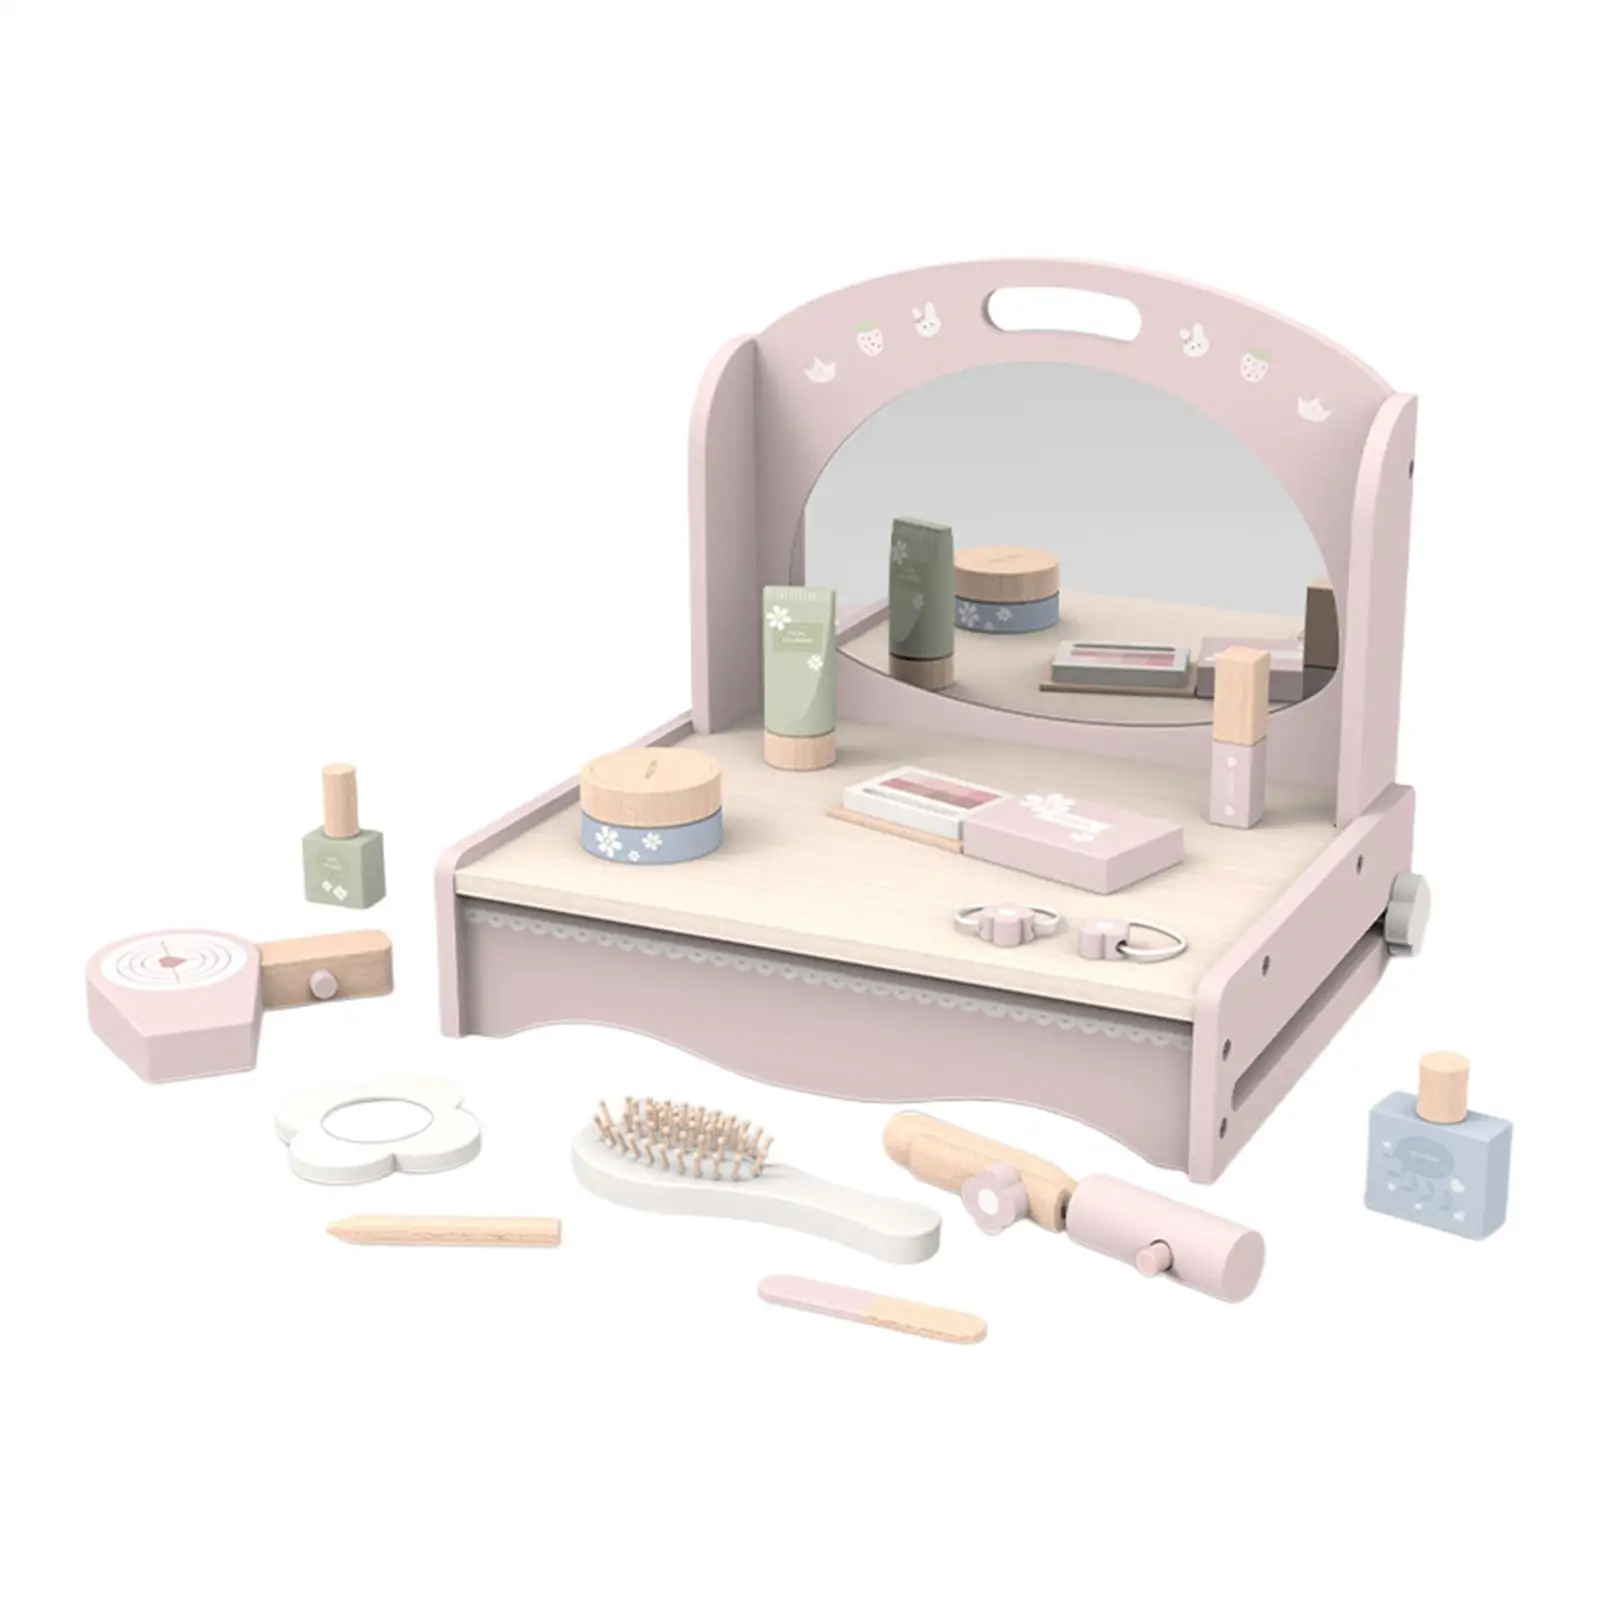 dress Table Toy Pretend Play Makeup Toy Simulation Play Room Kids Makeup Sets Kids Play Vanity Toy for Learning Role Play